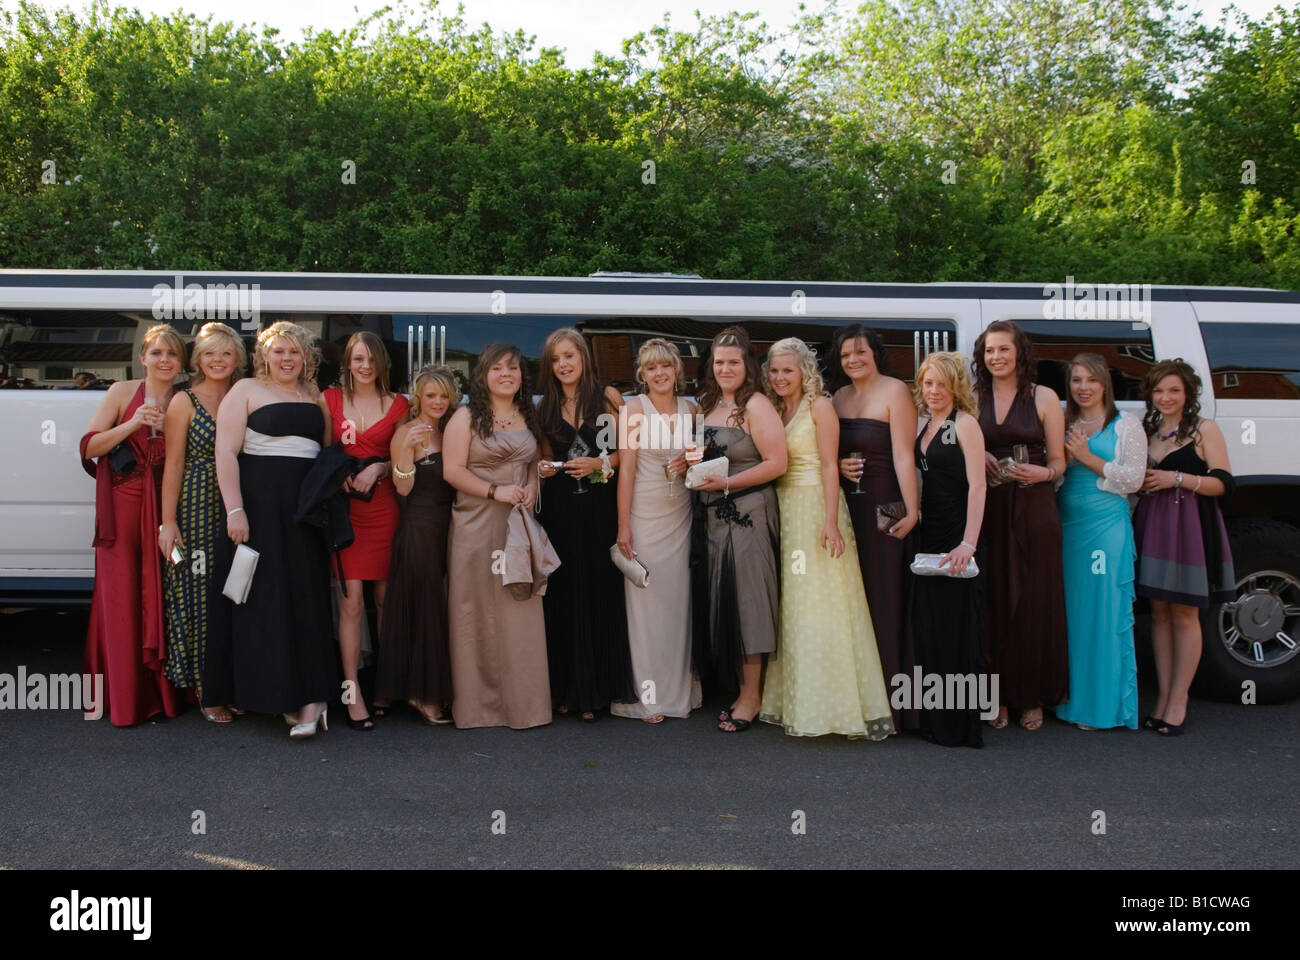 Prom party UK 2000s. Limo will take  sixteen year old adolescent teenage girls going to a leaving school prom Surrey 2008 UK  HOMER SYKES Stock Photo